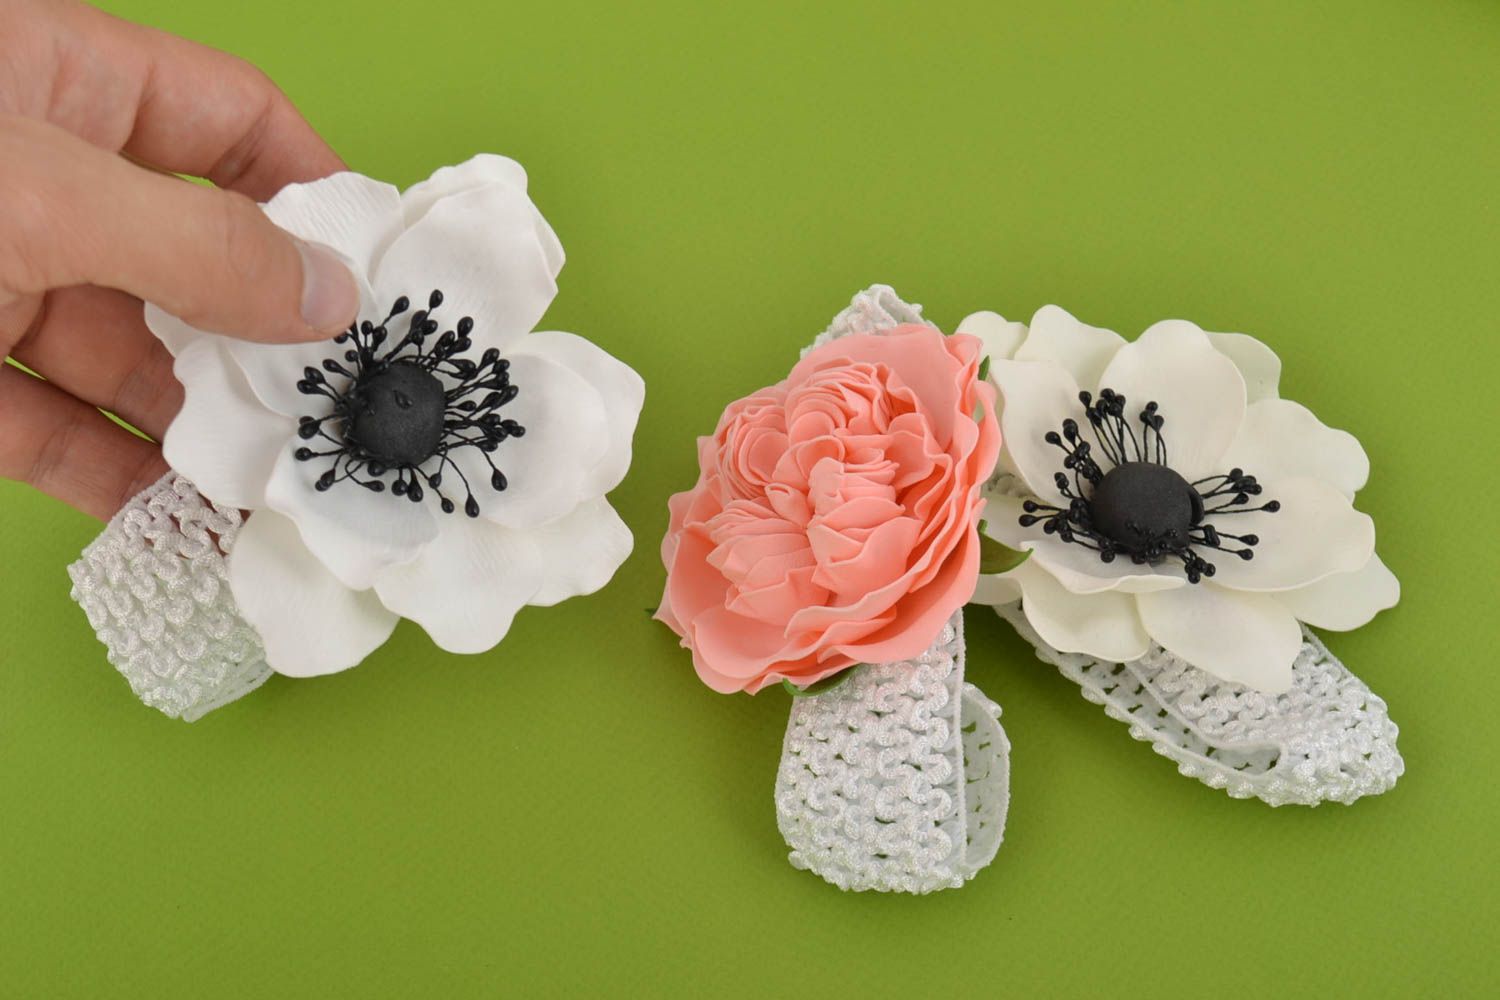 Set of 3 handmade textile stretchy headbands flower hair bands gifts for her photo 5